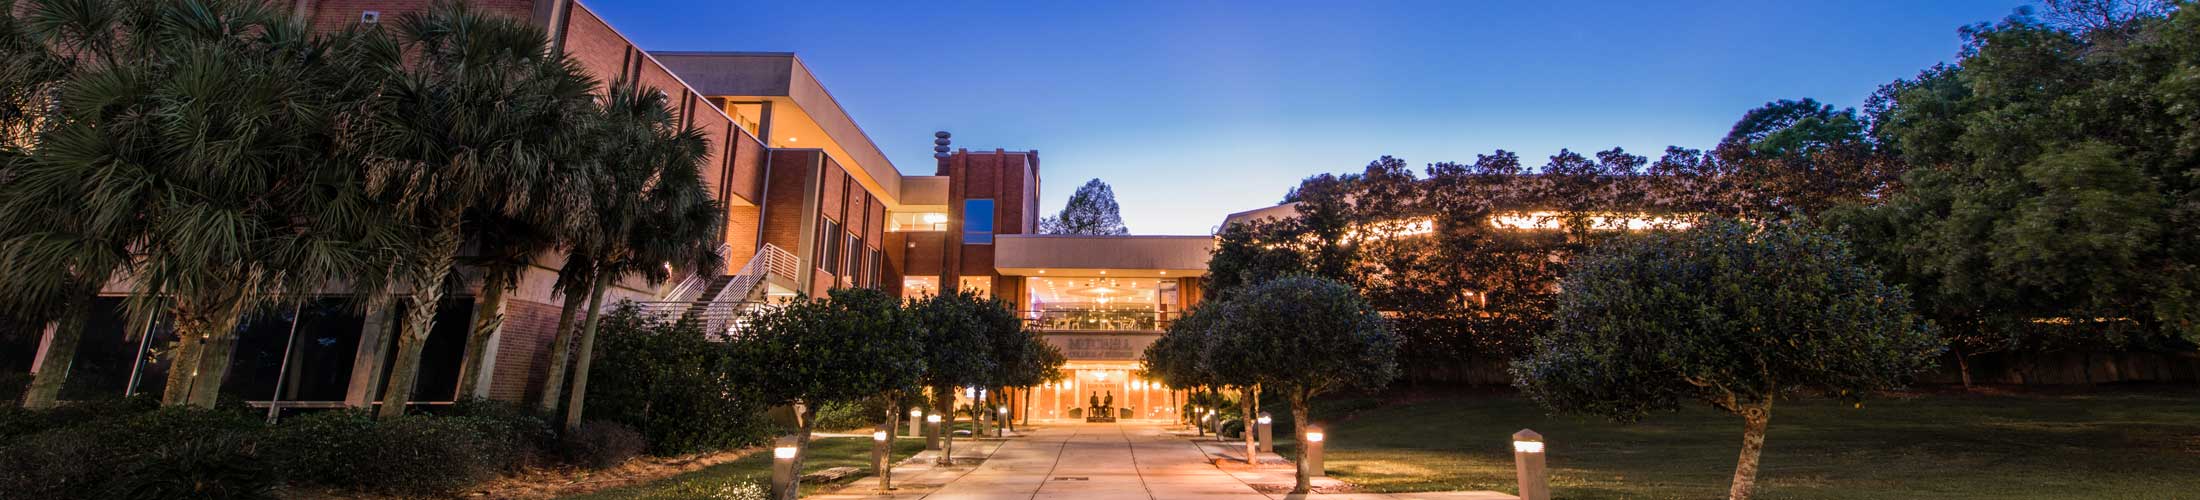 Mitchell College of Business at Night as one of the top business schools in Alabama.